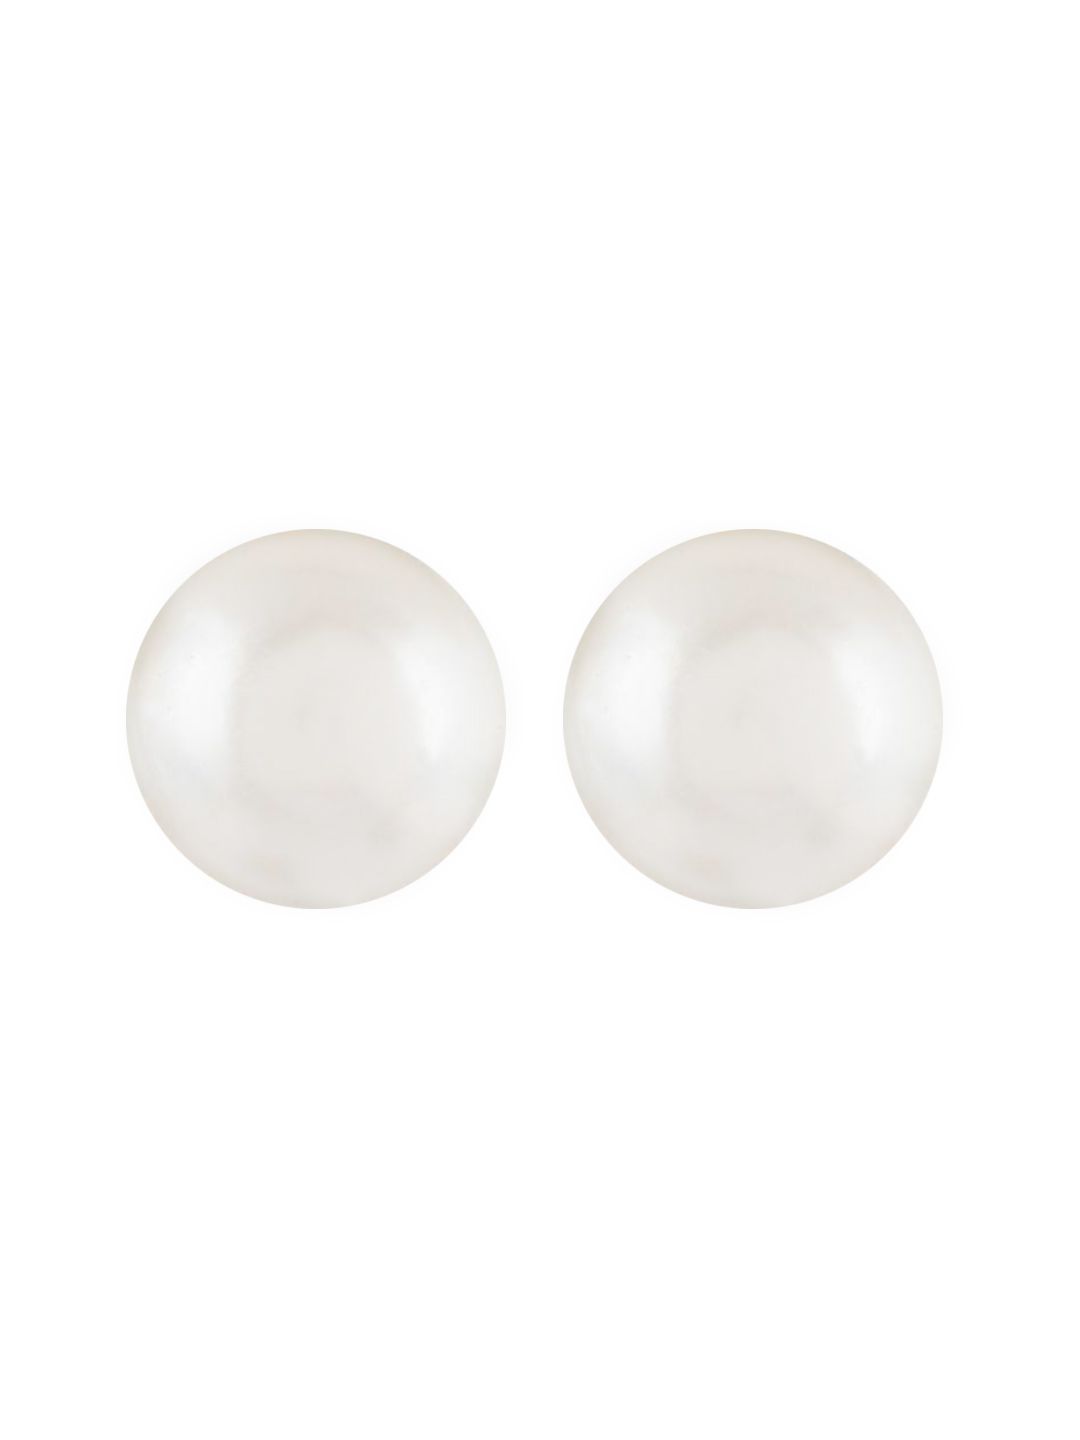 ERILINE JEWELRY Silver-Plated & White Contemporary Studs Earrings Price in India